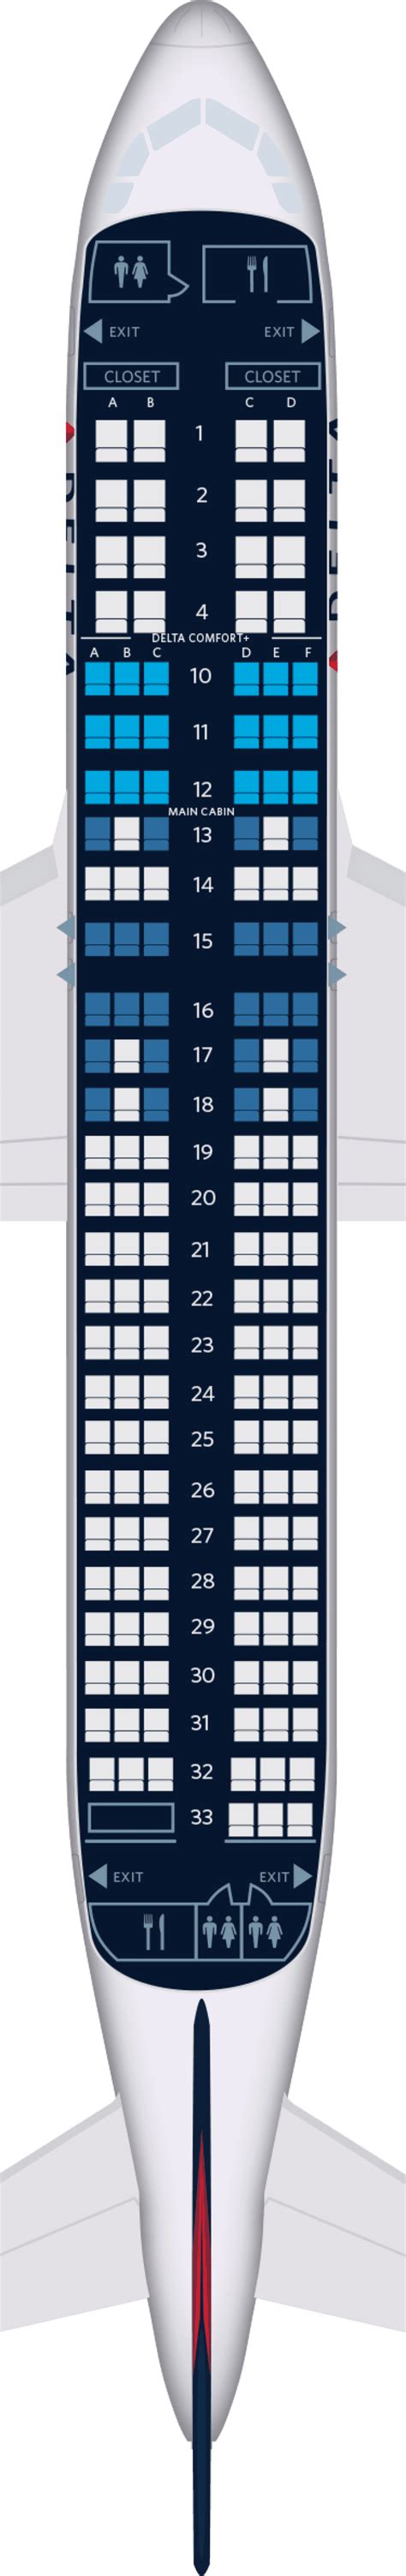 Airbus A320 200 Seat Maps Specs And Amenities Delta Air Lines